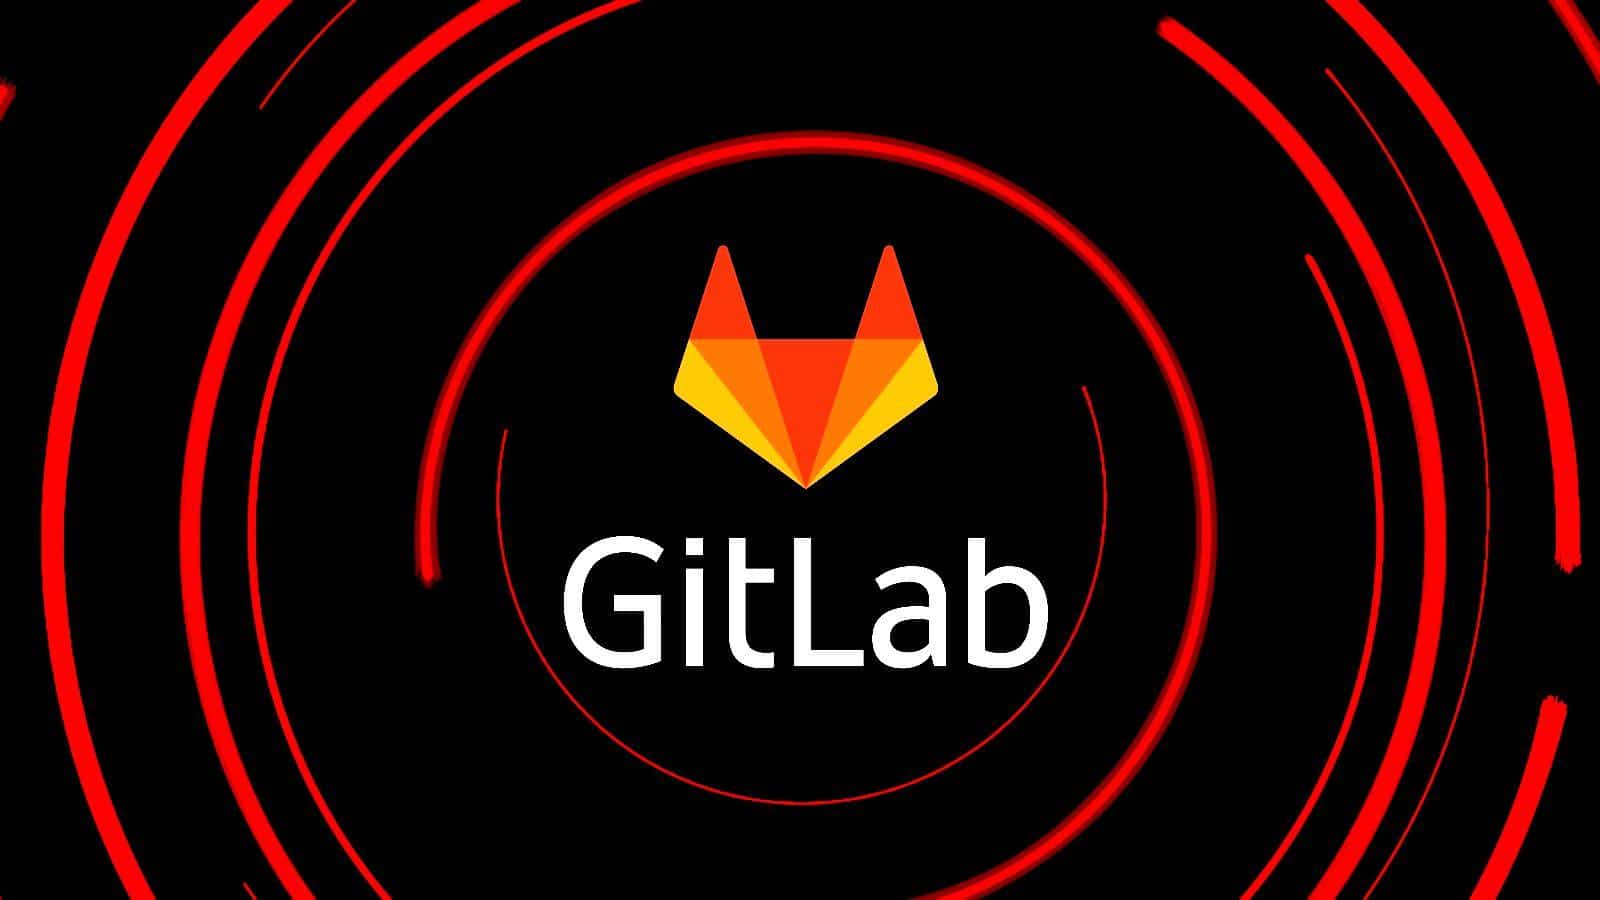 GitLab ‘strongly recommends’ patching critical RCE vulnerability